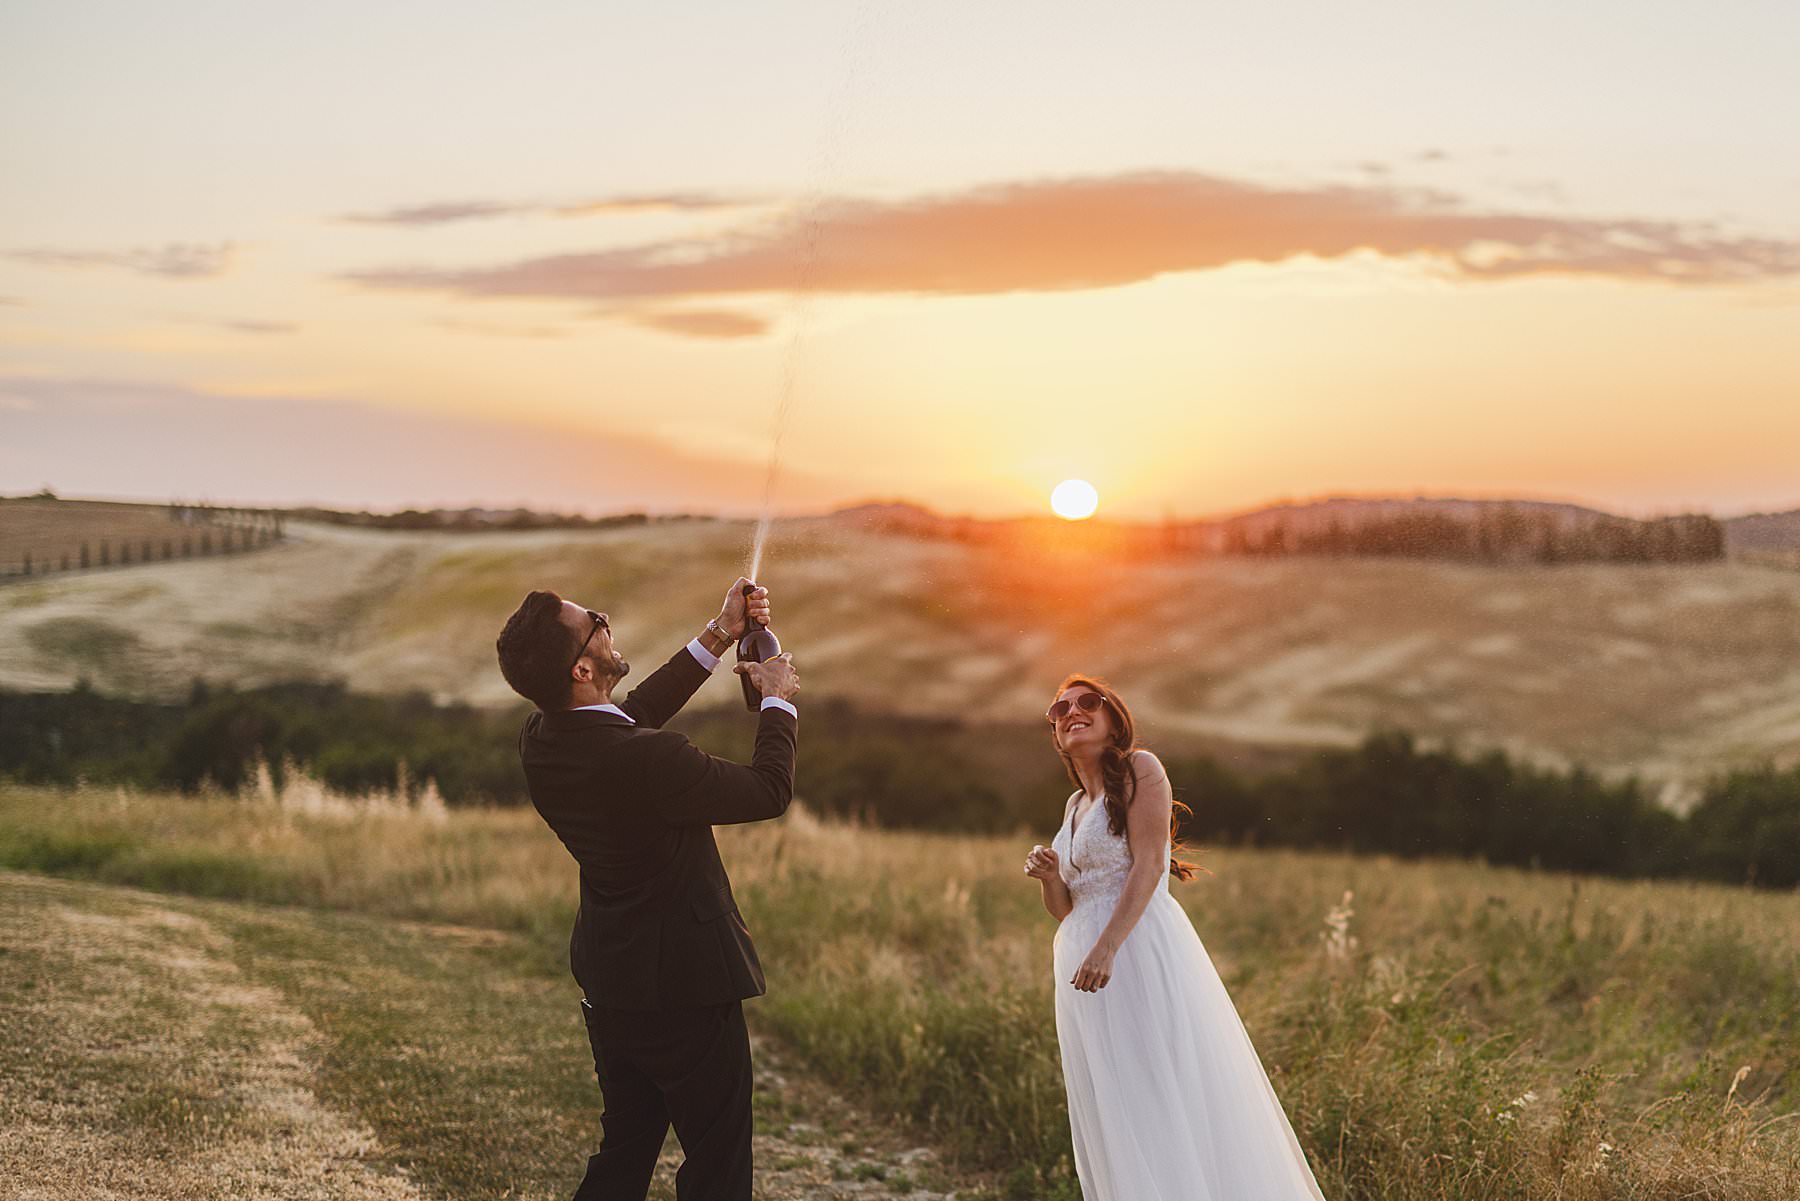 Exciting bride and groom elopement celebration in the golden hour light in the countryside of Tuscany at Vitaleta Chapel near Pienza